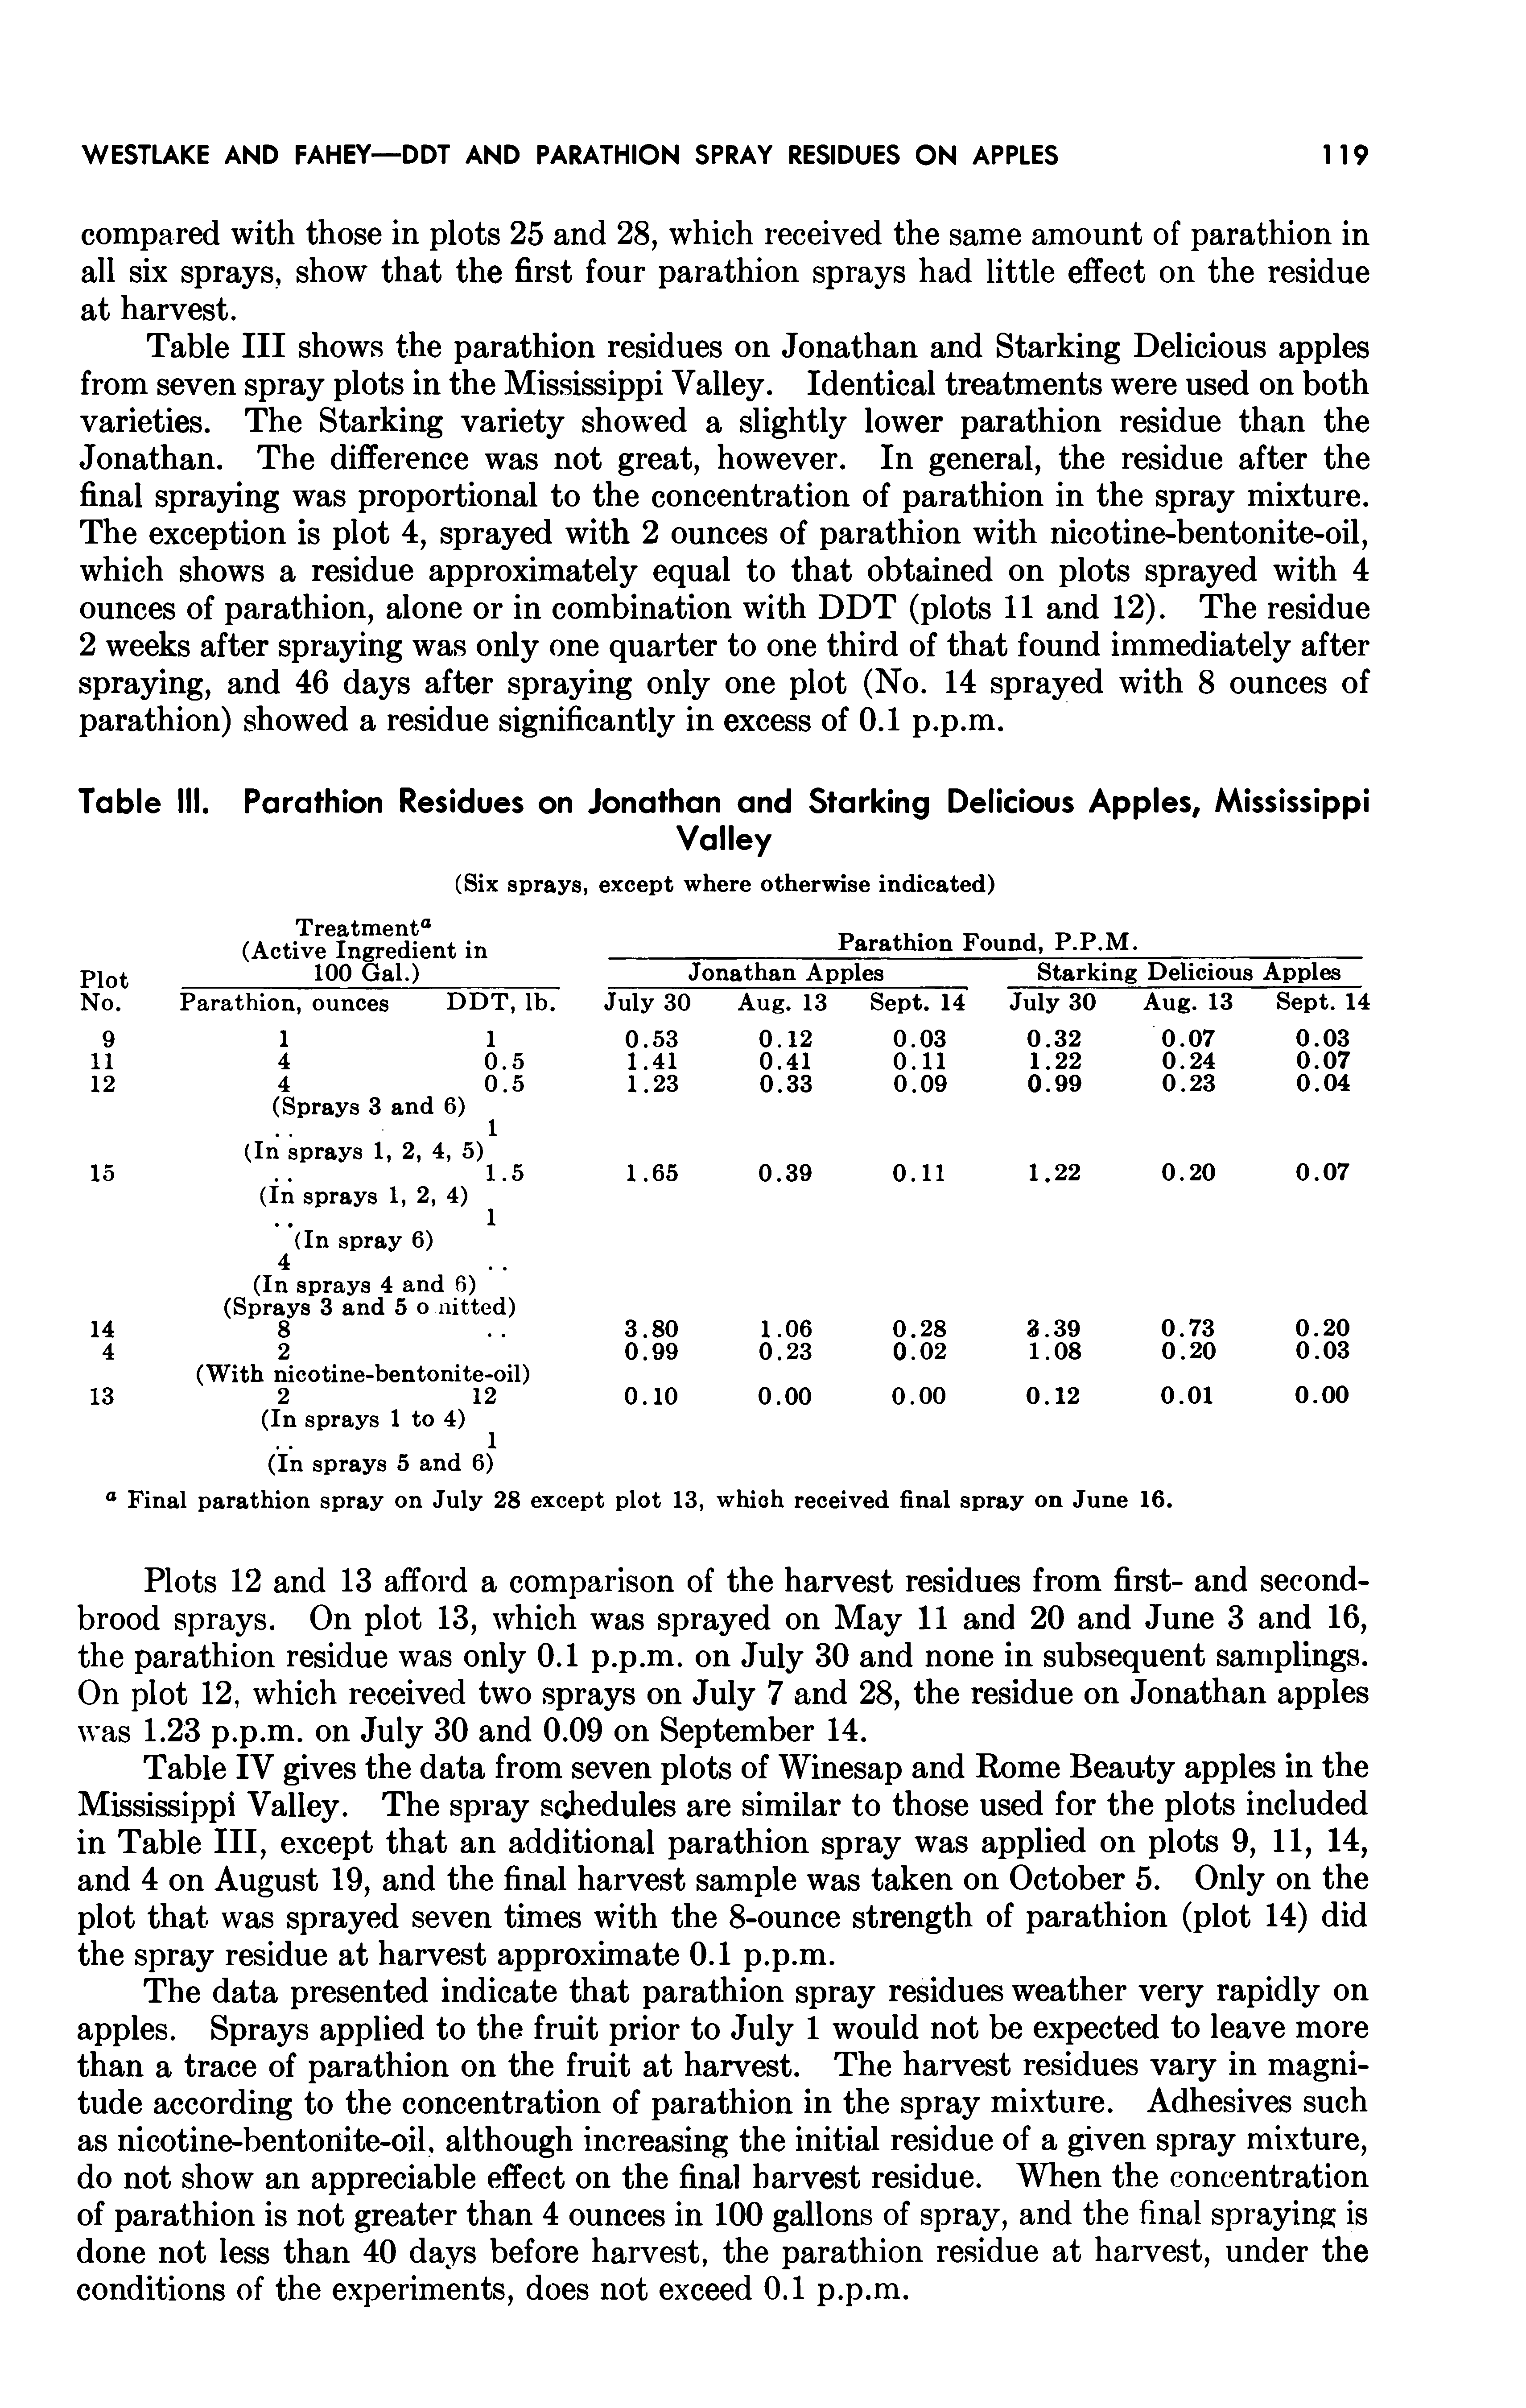 Table IV gives the data from seven plots of Winesap and Rome Beauty apples in the Mississippi Valley. The spray schedules are similar to those used for the plots included in Table III, except that an additional parathion spray was applied on plots 9, 11, 14, and 4 on August 19, and the final harvest sample was taken on October 5. Only on the plot that was sprayed seven times with the 8-ounce strength of parathion (plot 14) did the spray residue at harvest approximate 0.1 p.p.m.